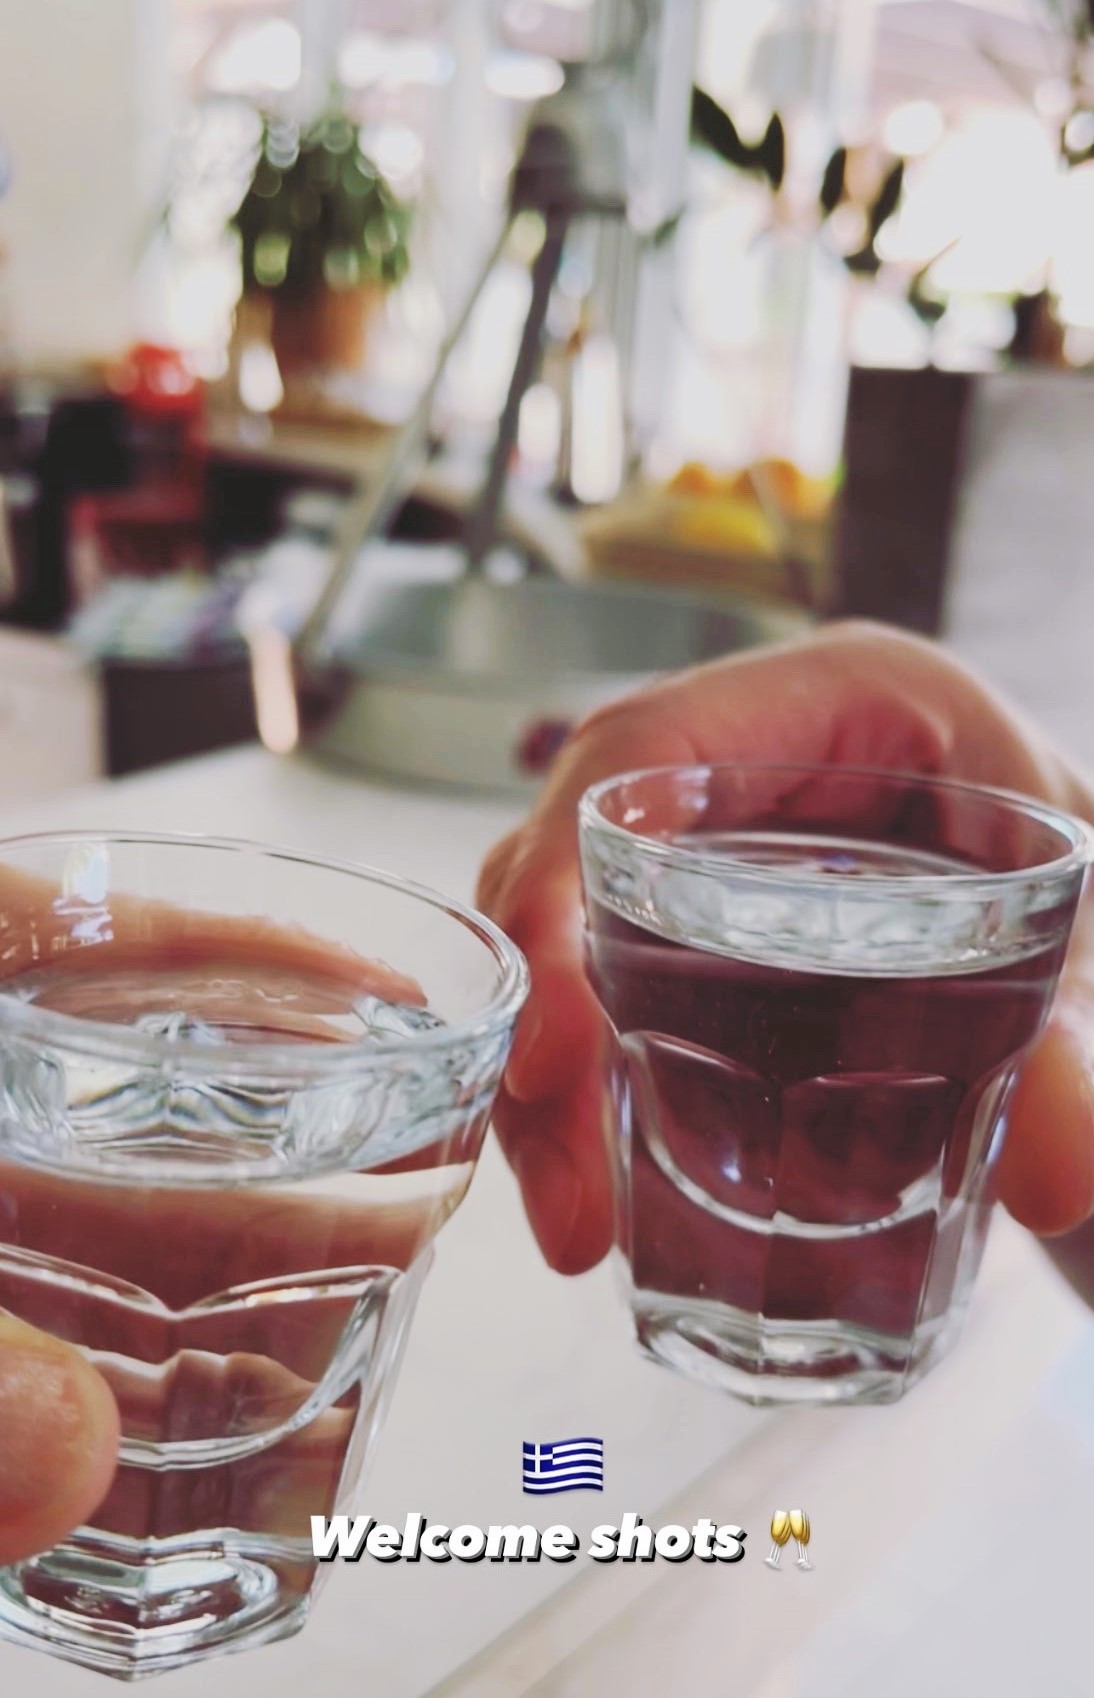 welcome shots of local liquor upon arrival at Goji Vegan hotel.